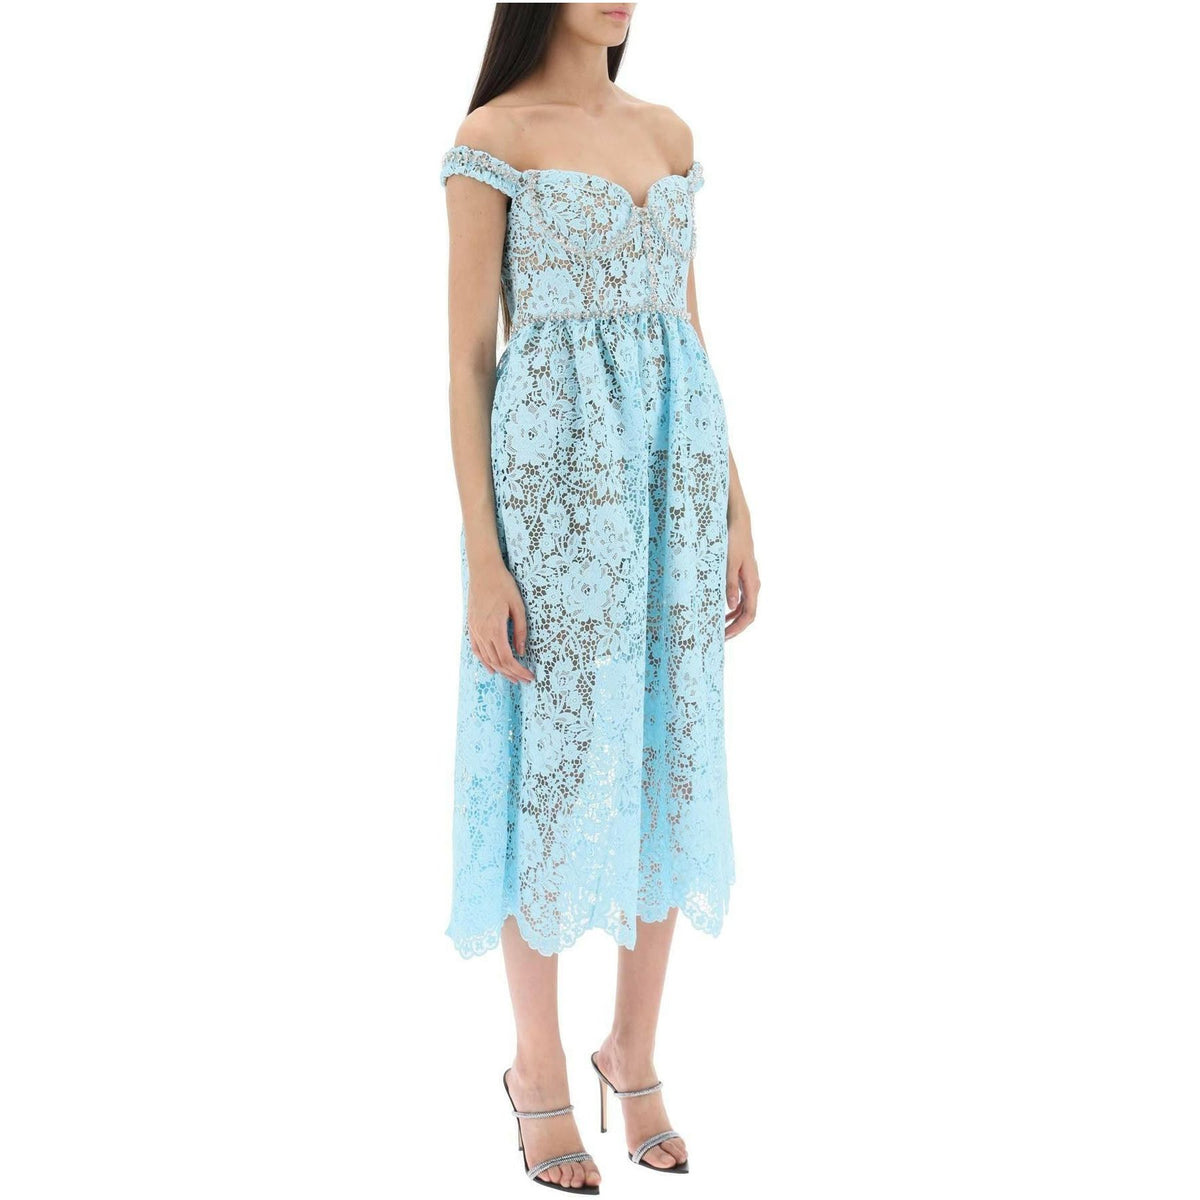 SELF PORTRAIT - Midi Dress In Floral Lace With Crystals - JOHN JULIA